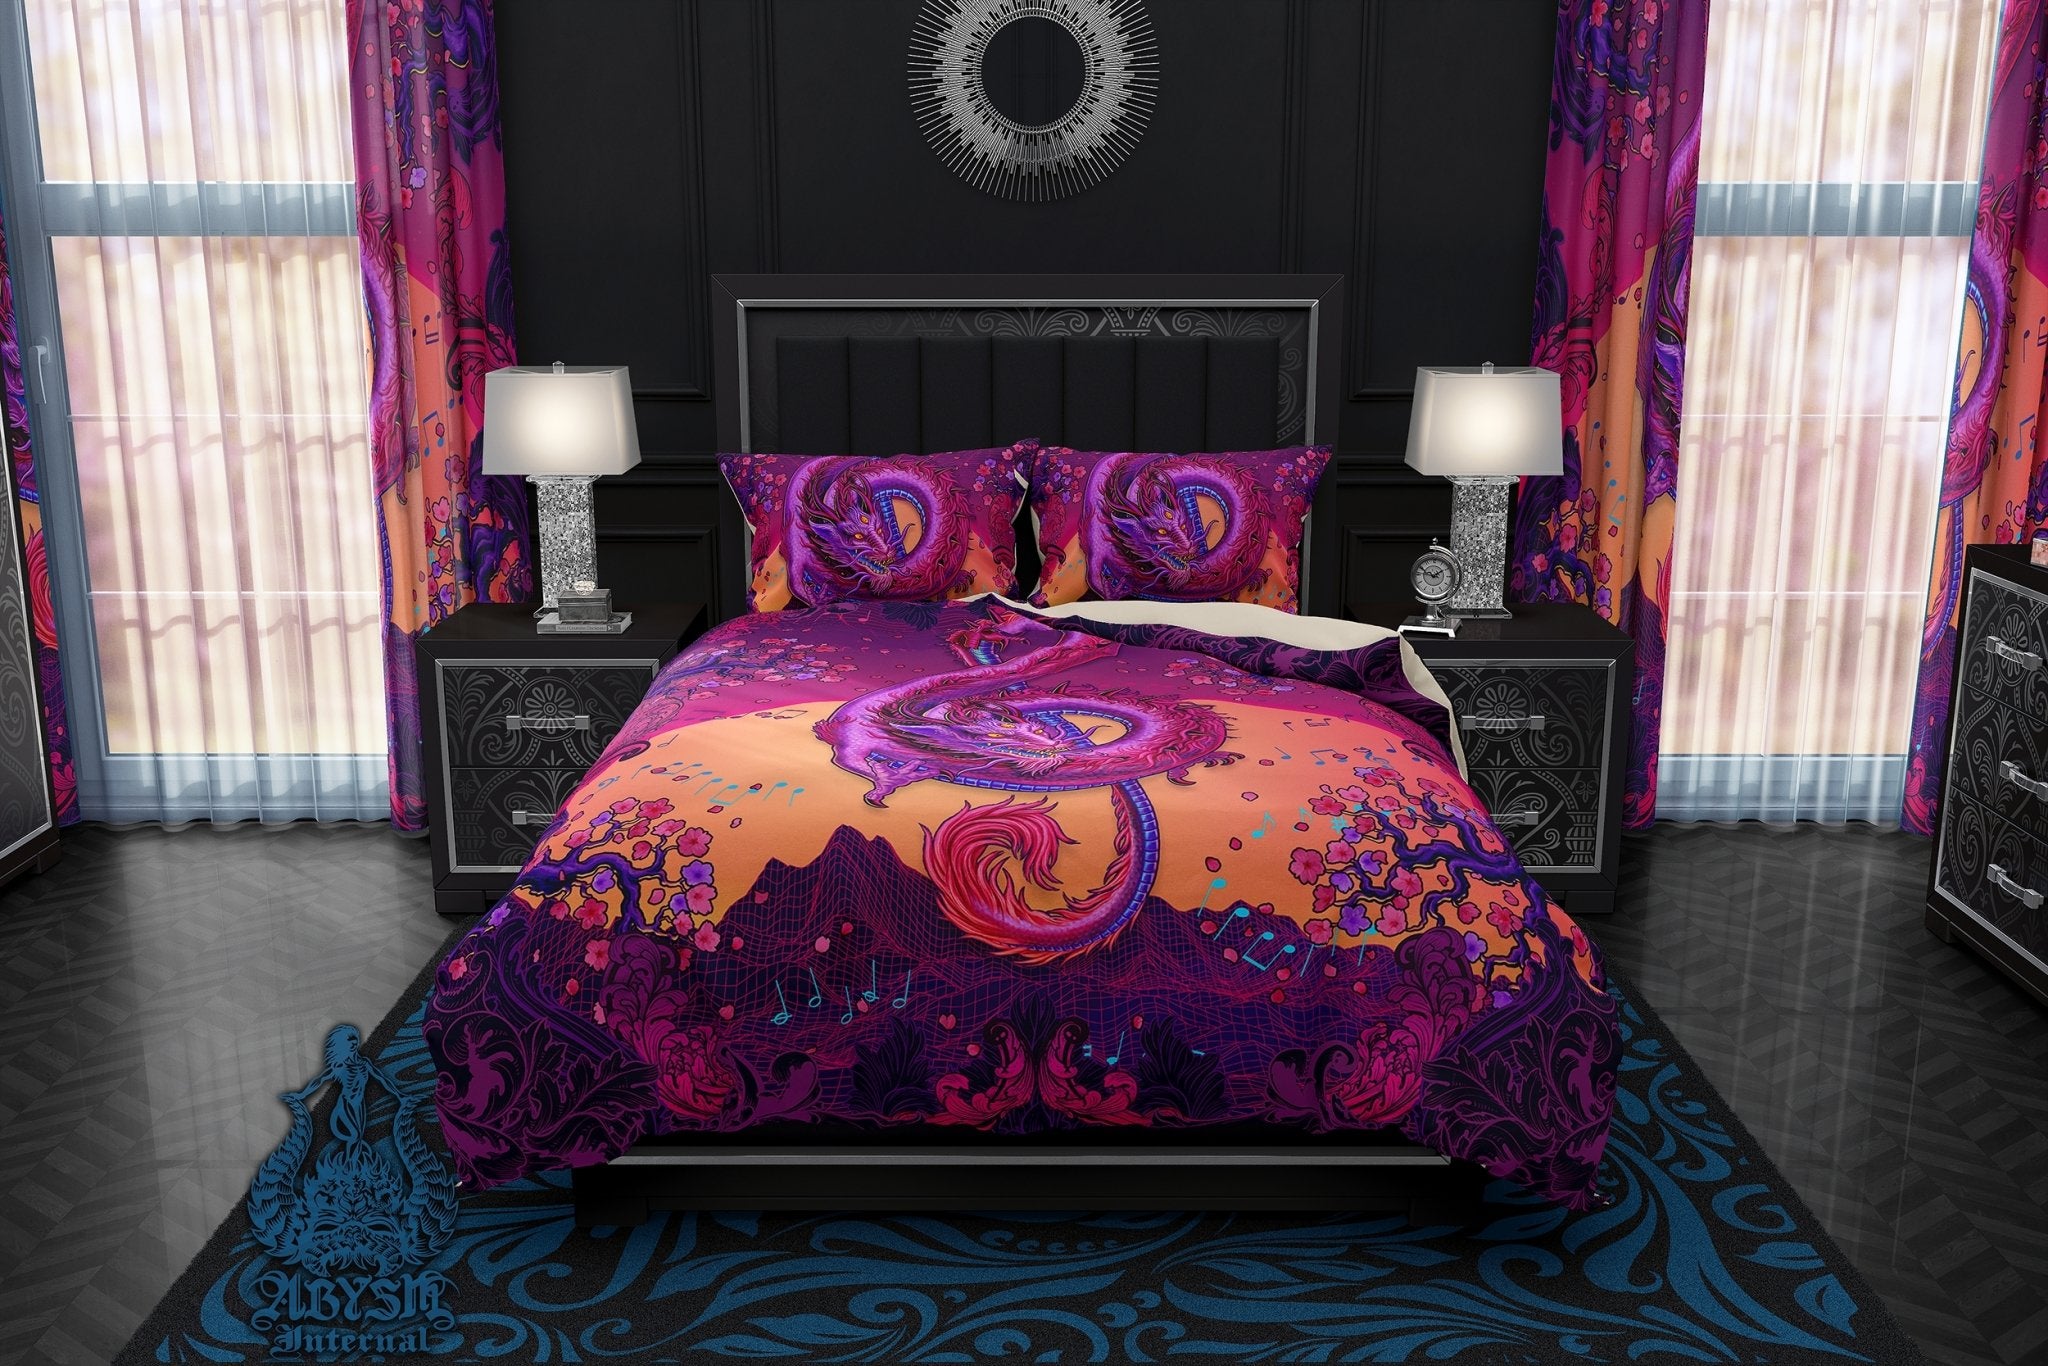 Synthwave Bedding Set, Comforter and Duvet, Vaporwave Bed Cover and Retrowave Bedroom Decor, King, Queen and Twin Size, Gamer Kids 80s Room - Psychedelic Music Dragon - Abysm Internal